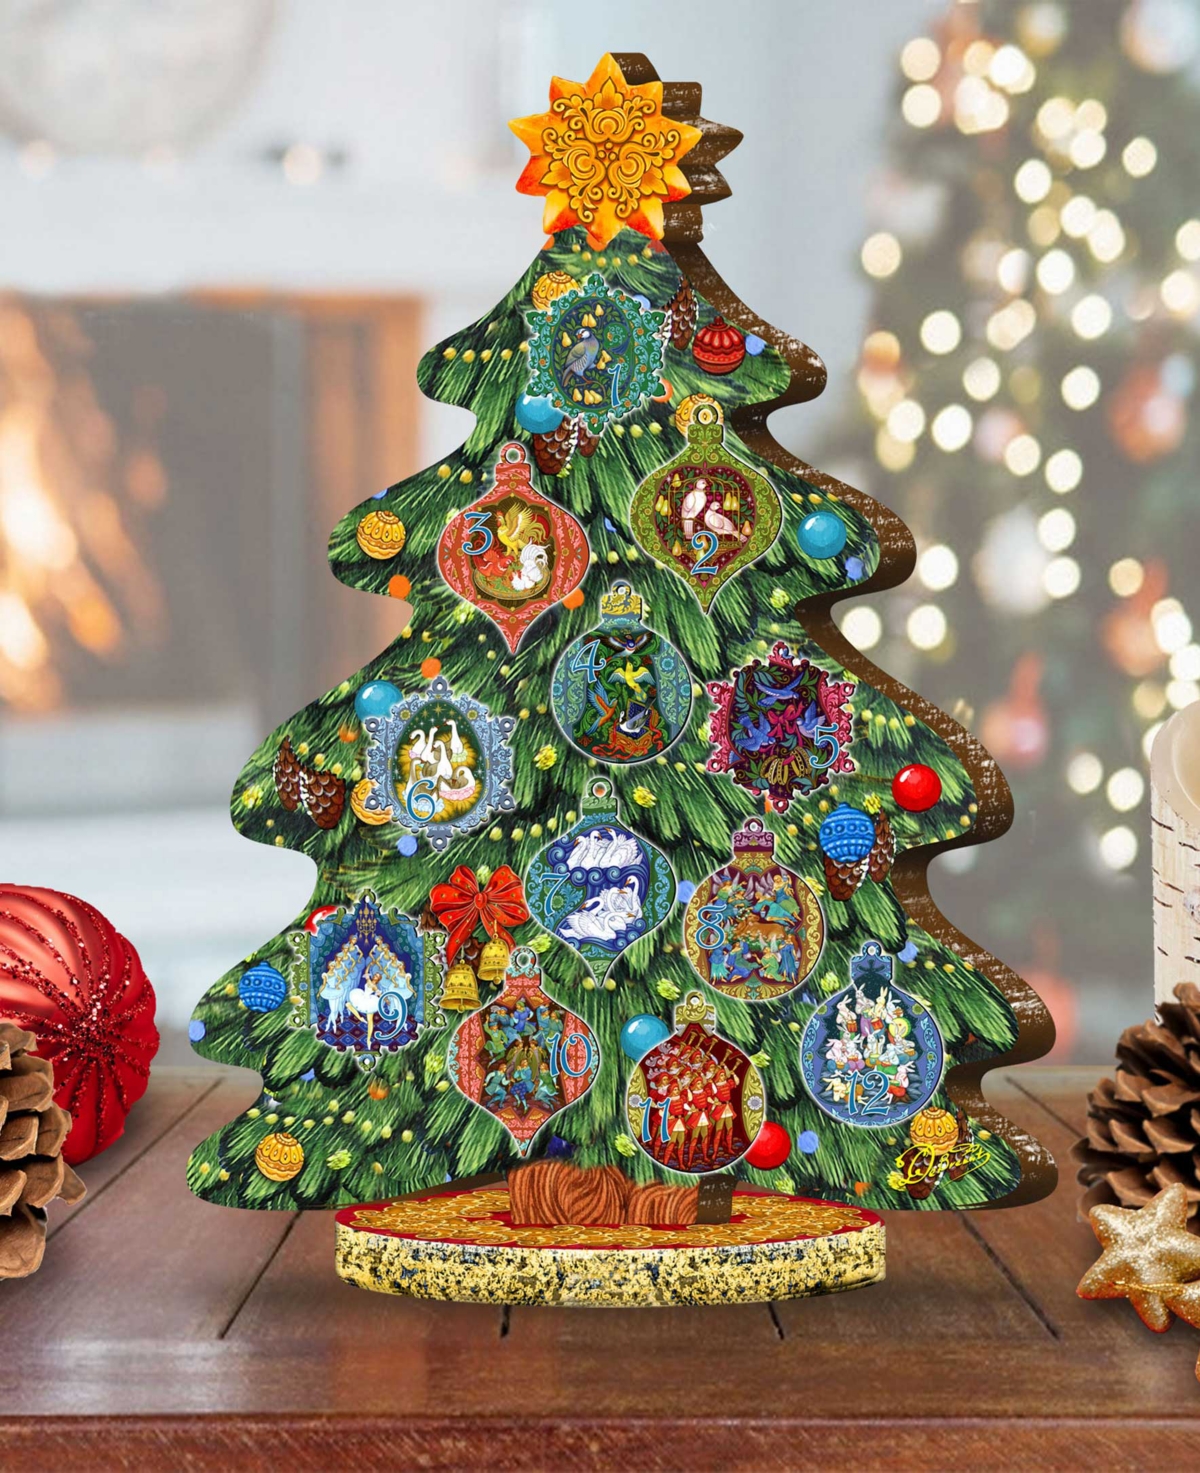 12 Days of Christmas Holiday Decorated Tree - Multi Color